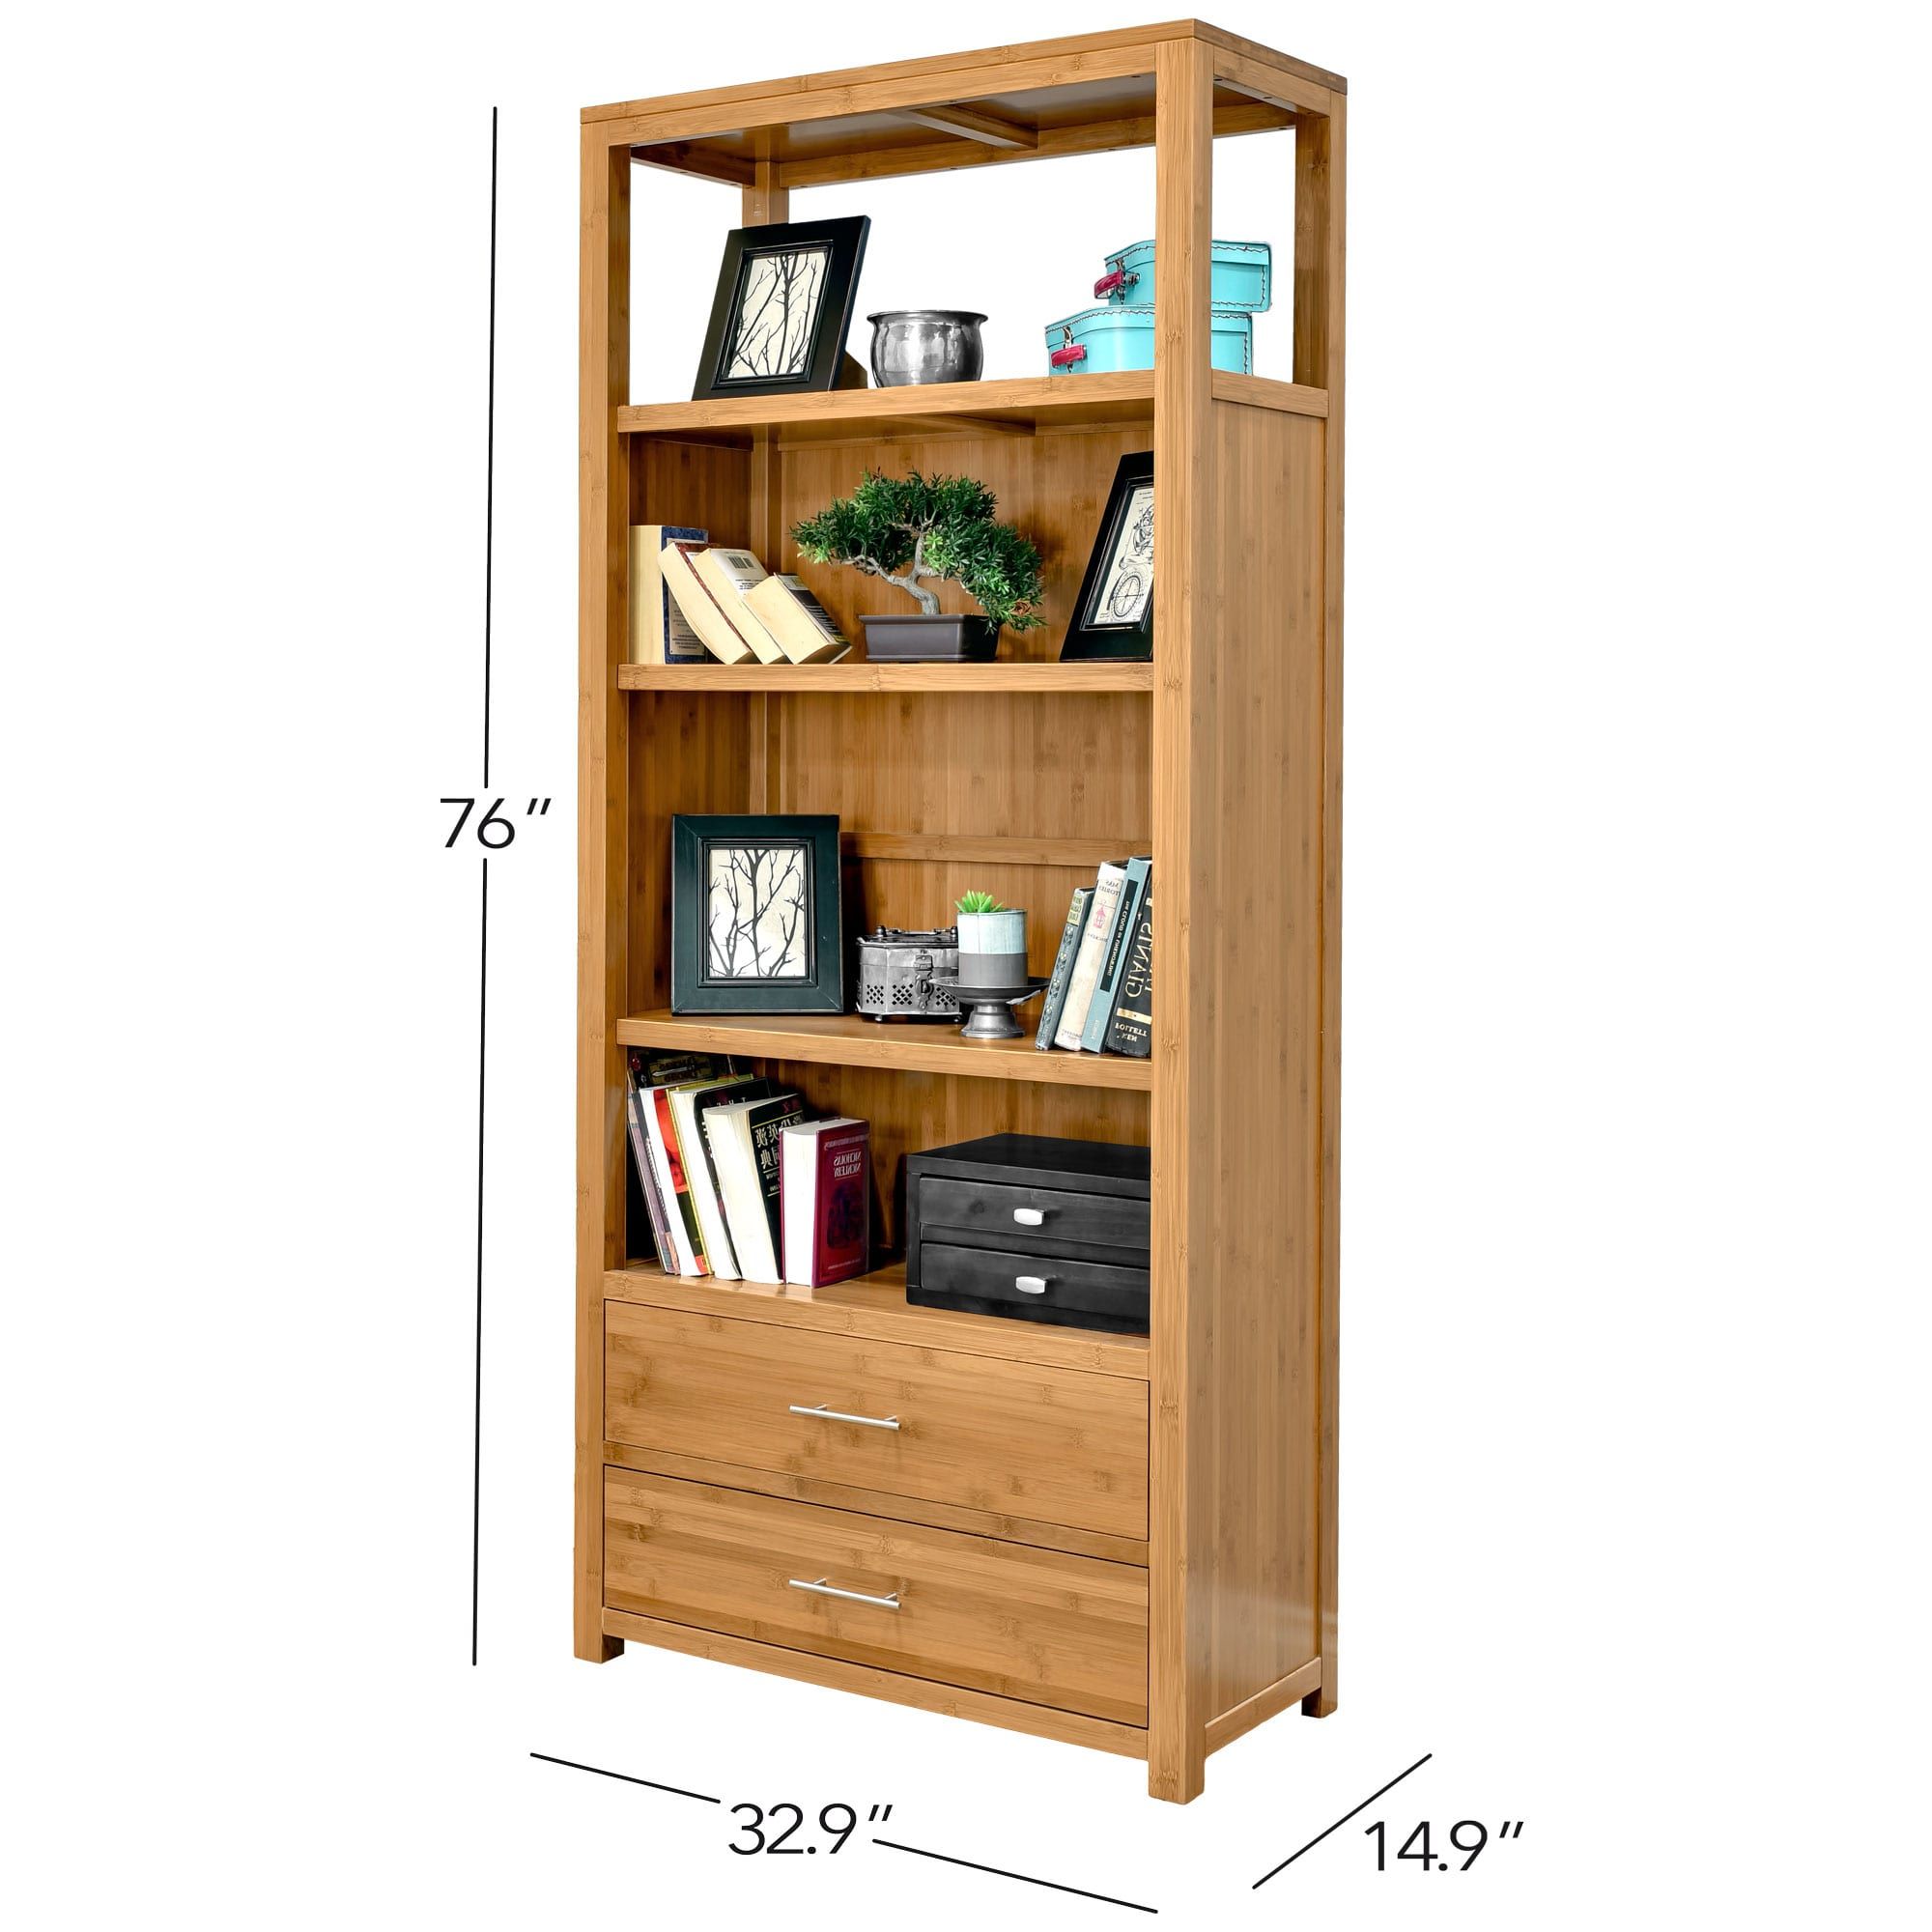 Niko 76" Bamboo Bookcase | Epoch Design Intended For Bamboo Bookcases (View 15 of 15)